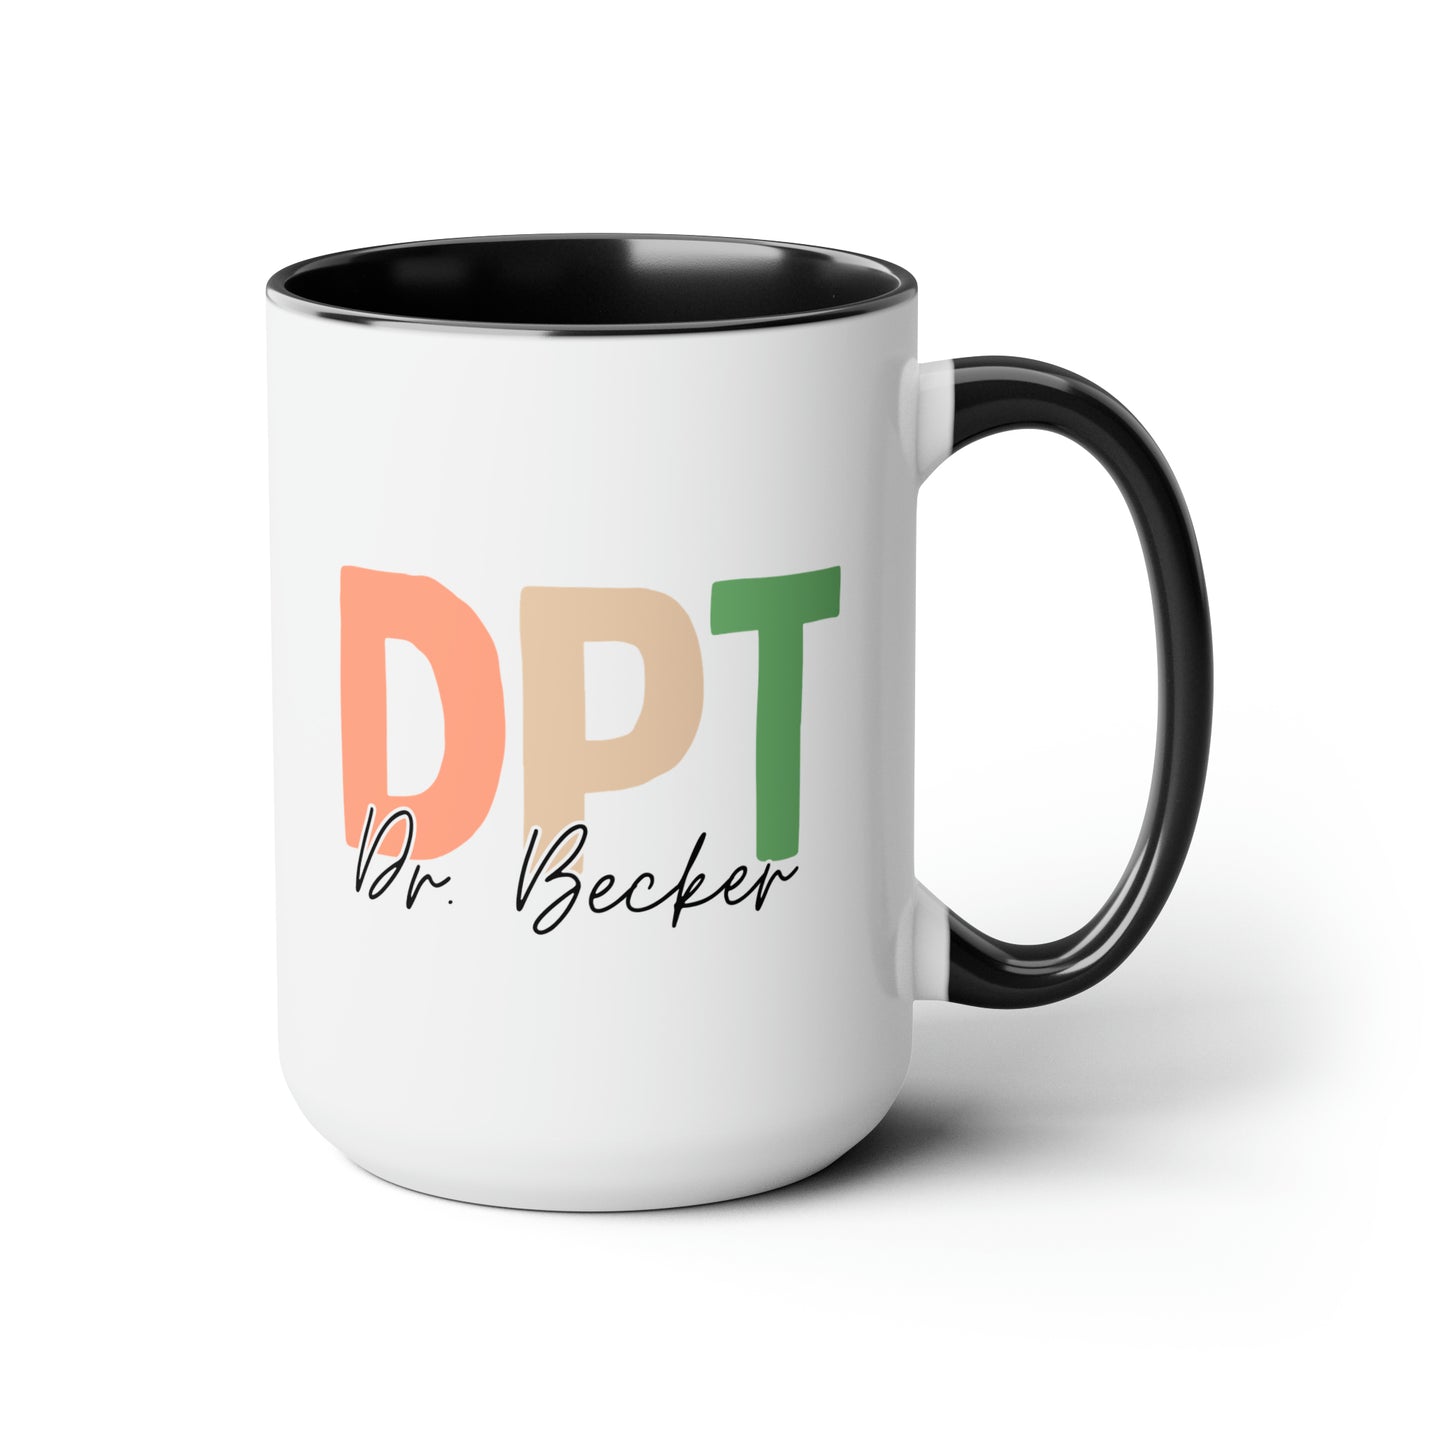 DPT Name 15oz white with black accent funny large coffee mug gift for doctor of physical therapy custom graduation Dr medicine waveywares wavey wares wavywares wavy wares